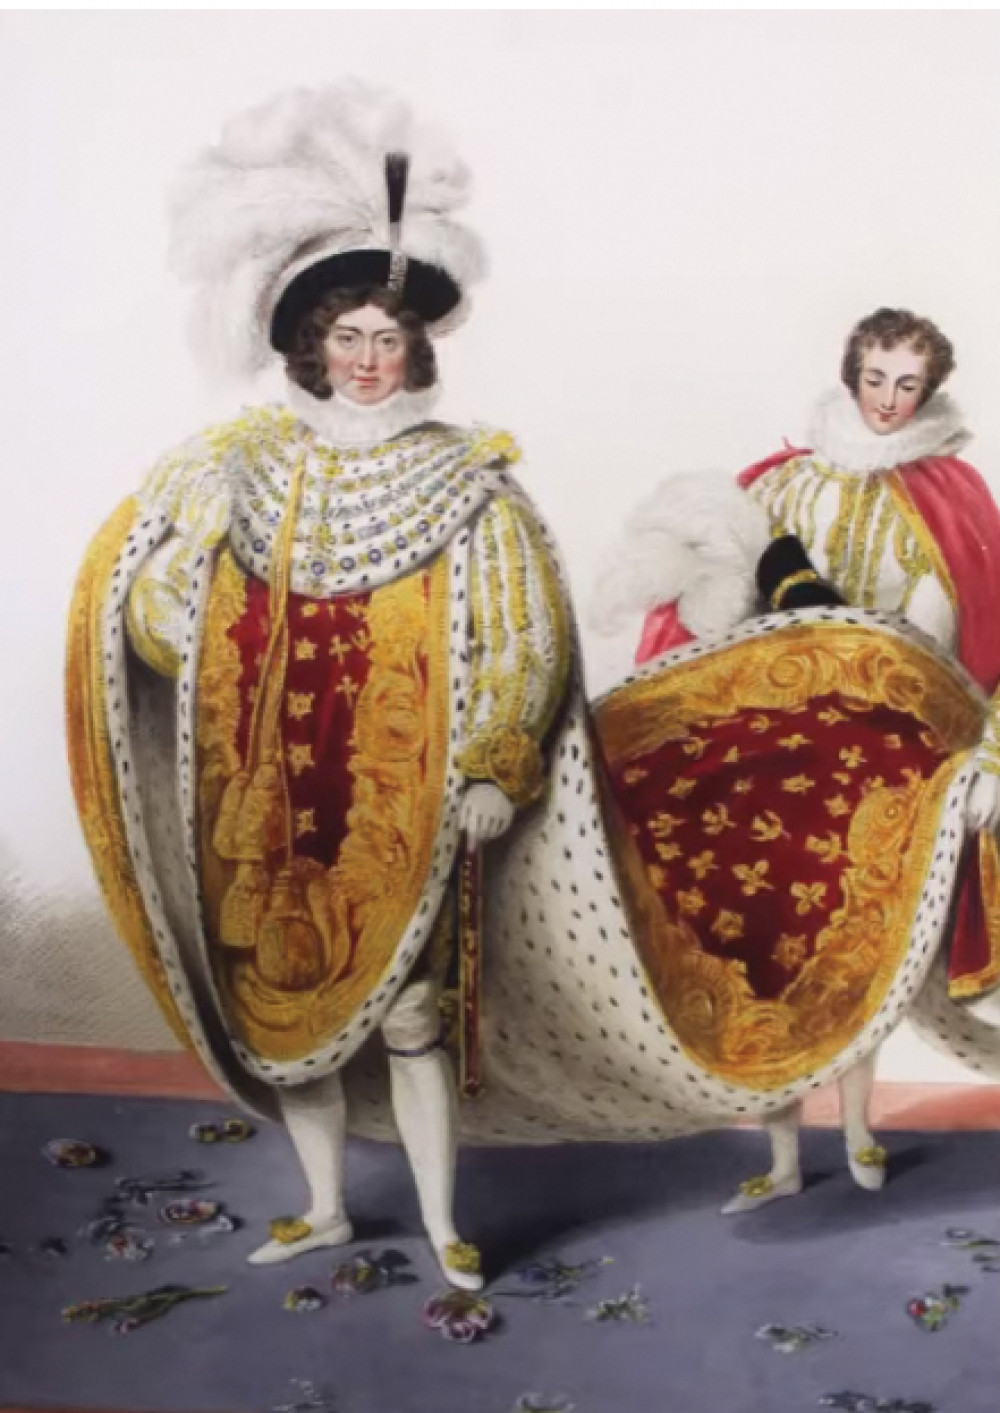 King George IV in his coronation robes.